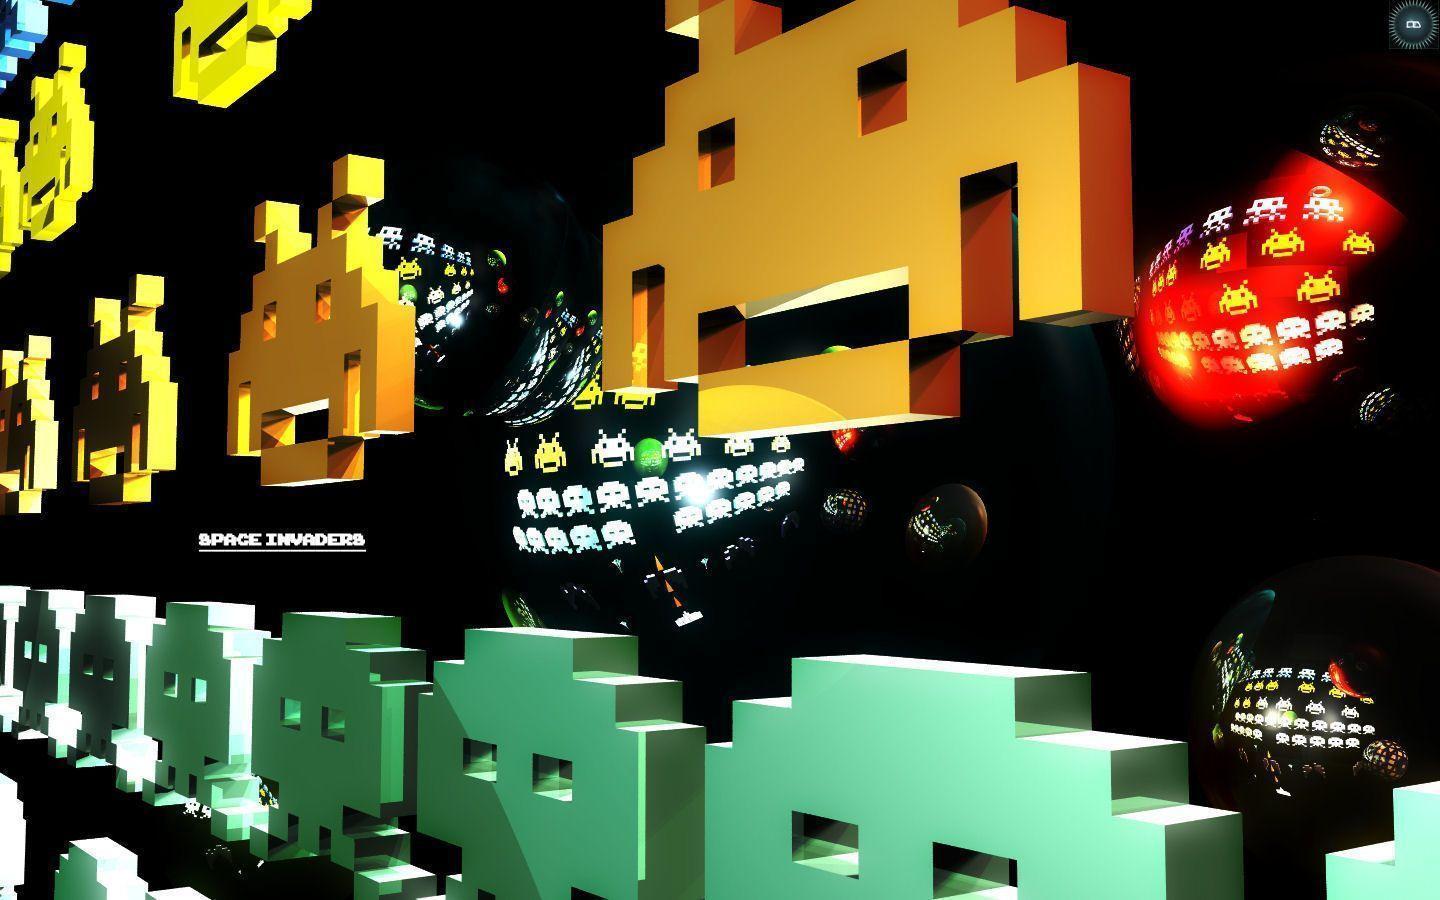 Space Invaders Wallpaper. Space Invaders Background